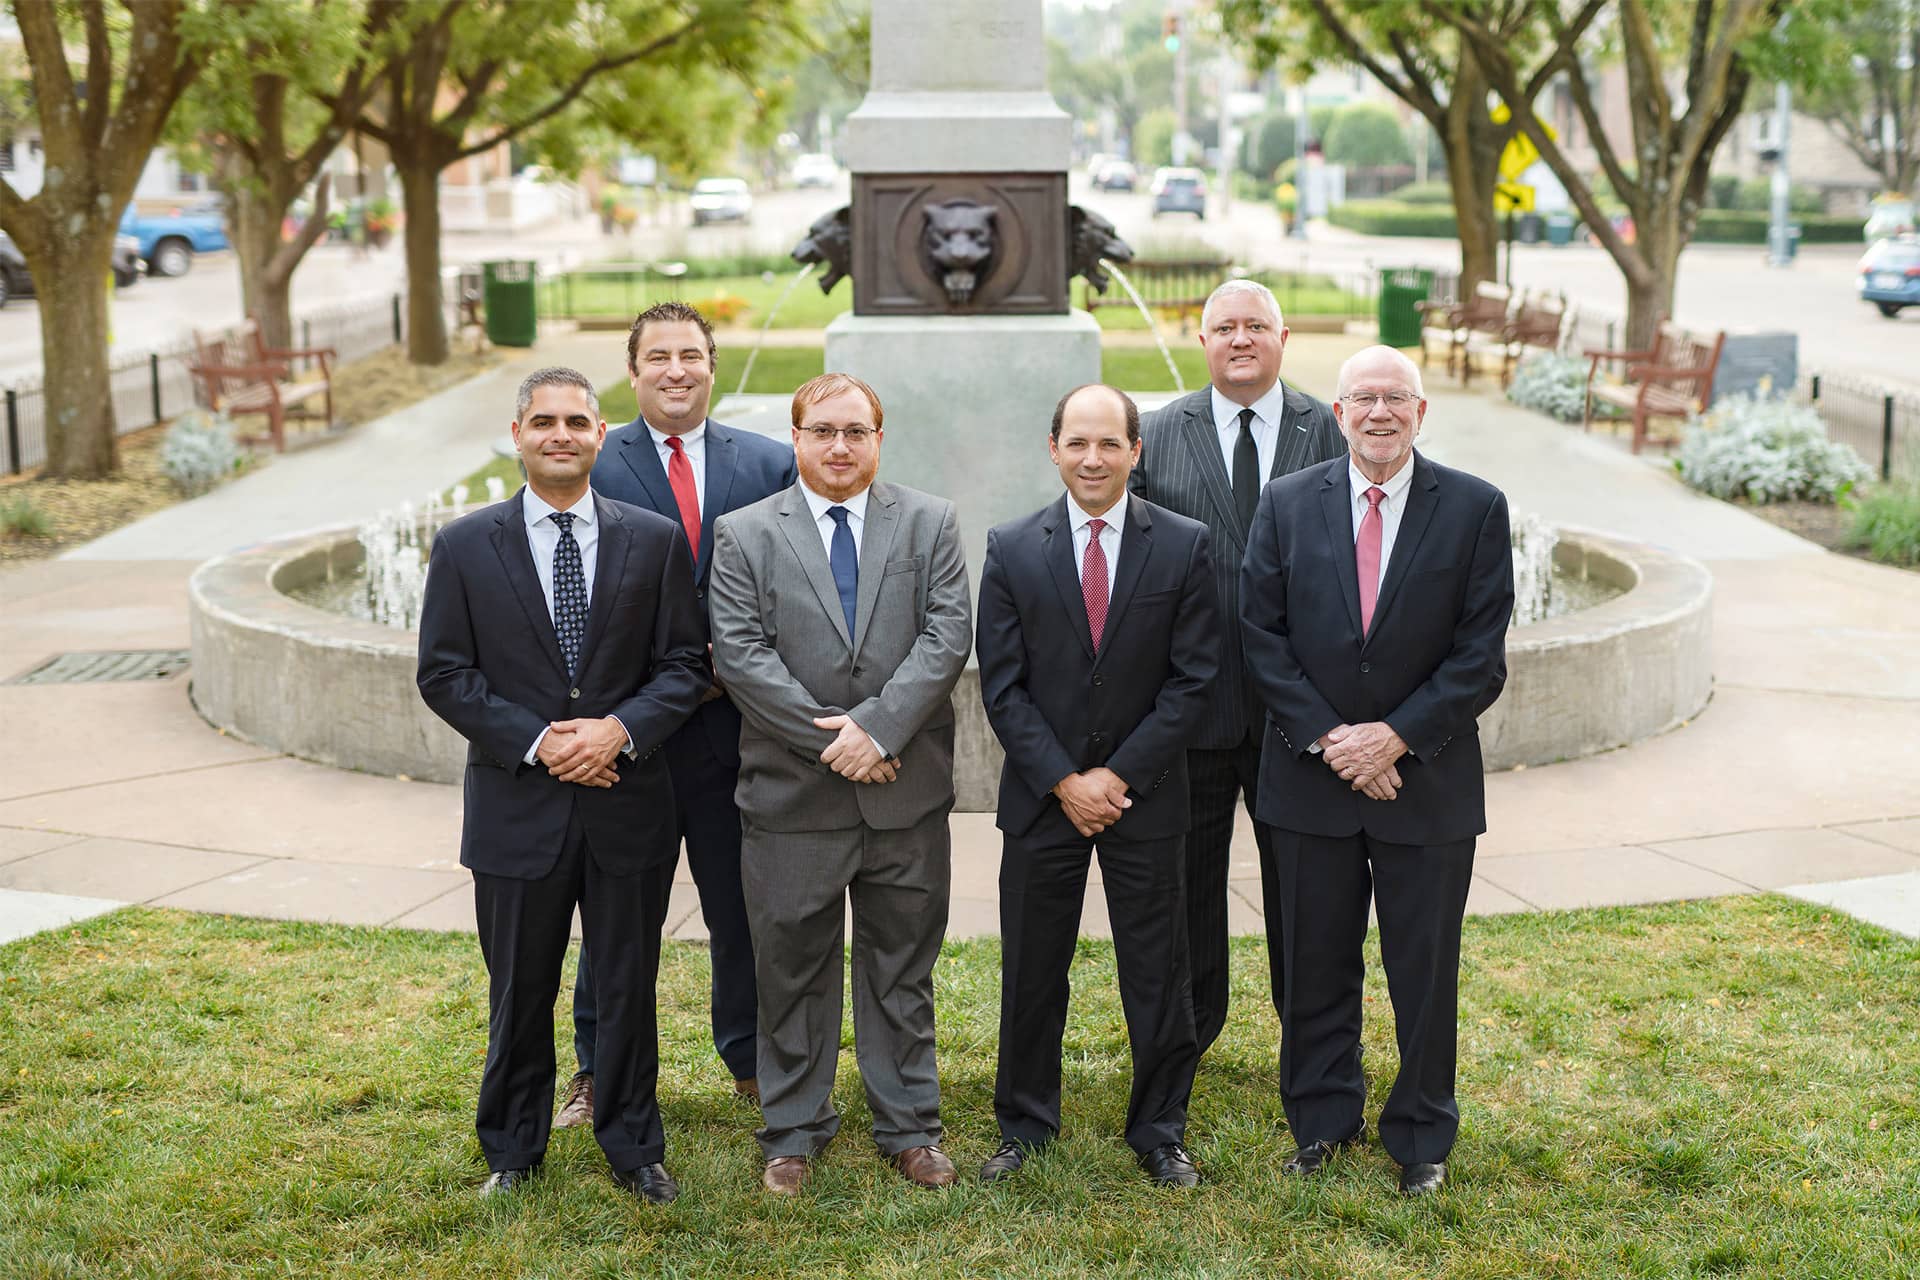 Minnillo Law Group standing in front of fountain in park on sunny day